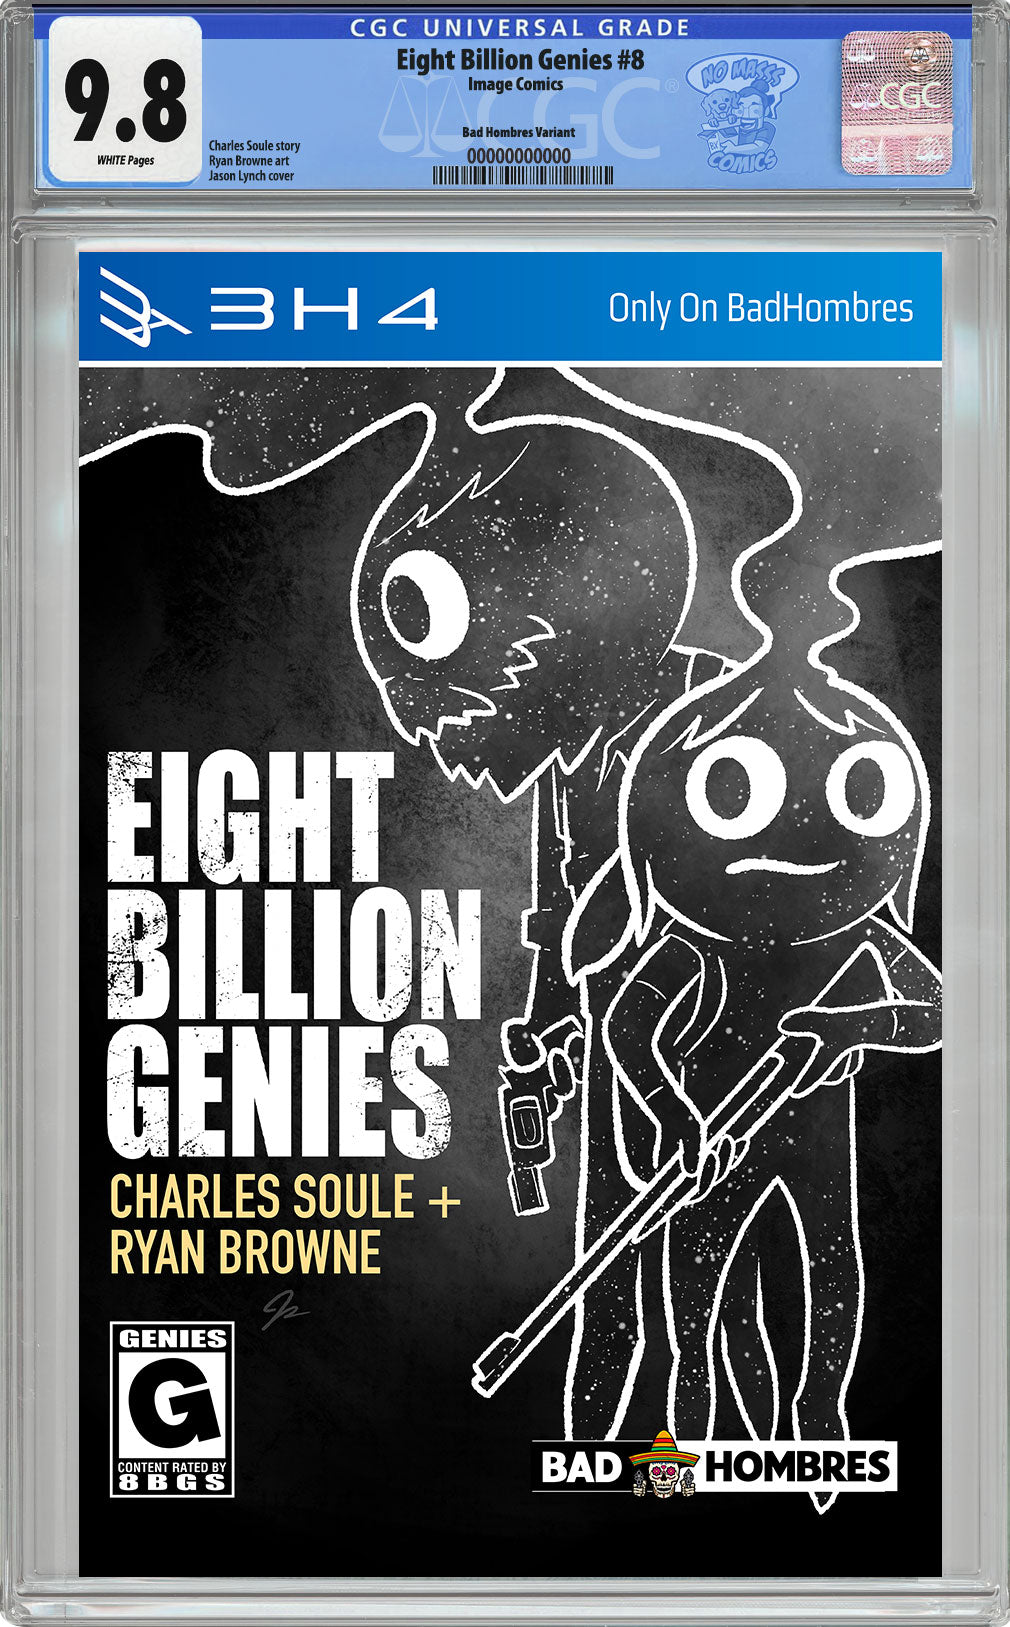 EIGHT BILLION GENIES #8 COVER BY FORGOT THE DUDES NAME MEGACON EXCLUSIVE CGC 9.8 Blue Label Remastered Version